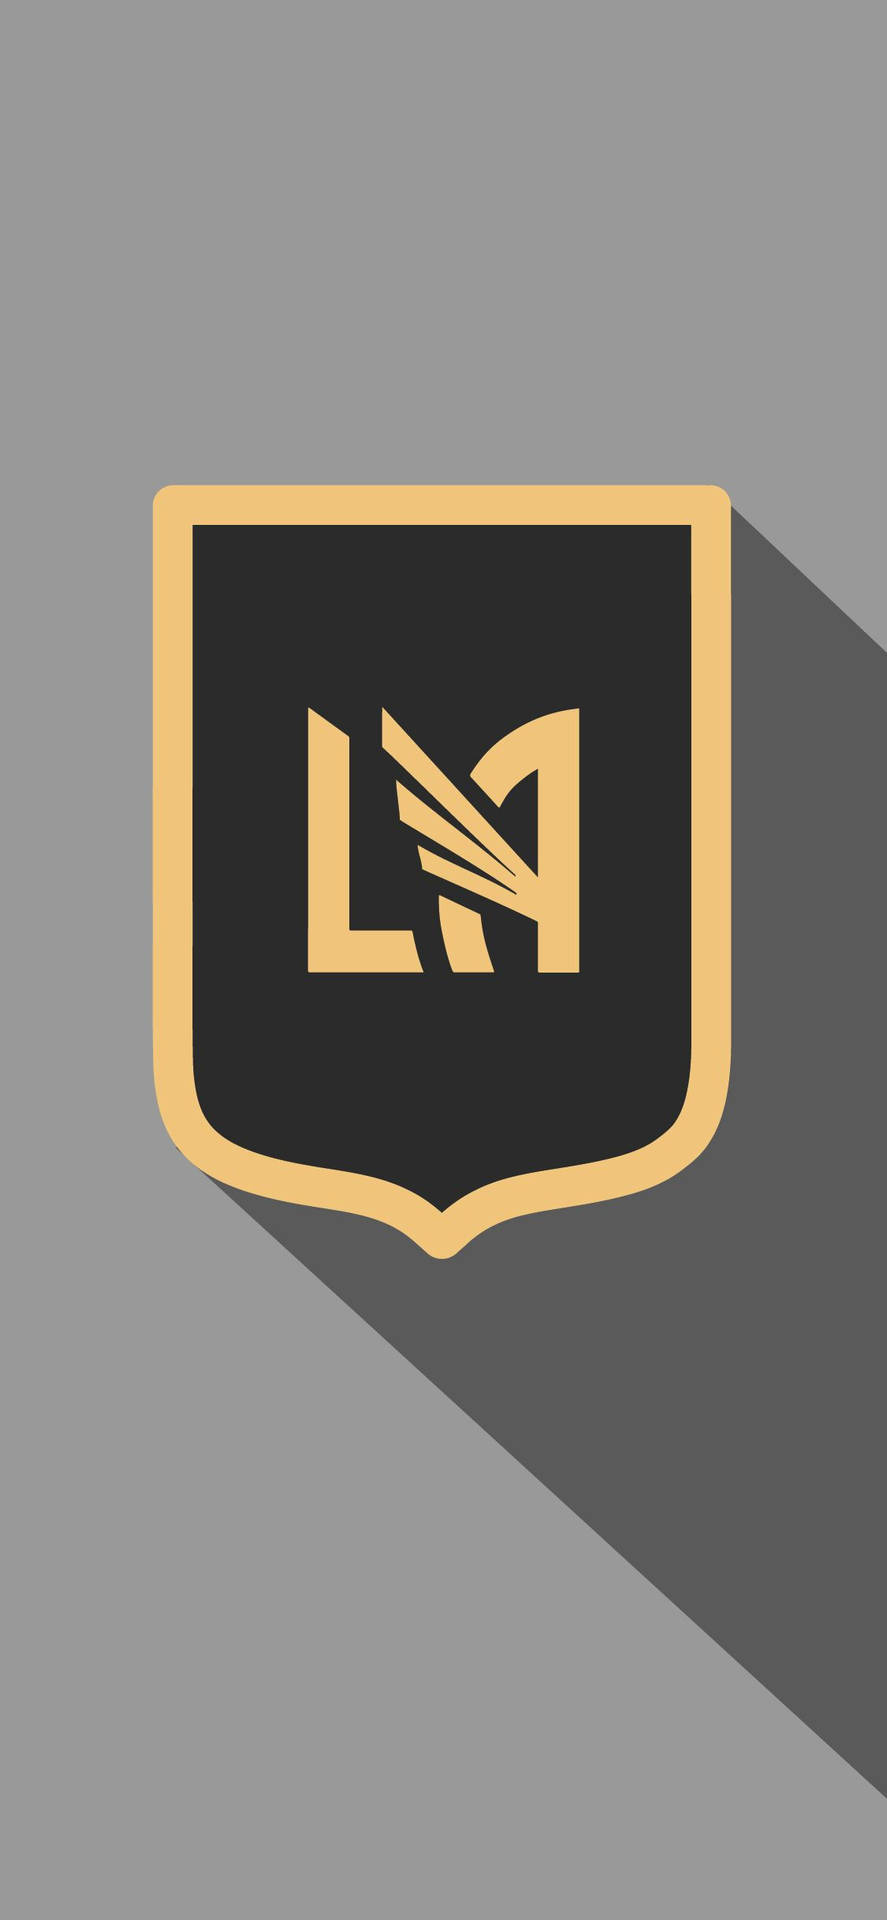 Lafc Logo With Gray Shadow Backdrop